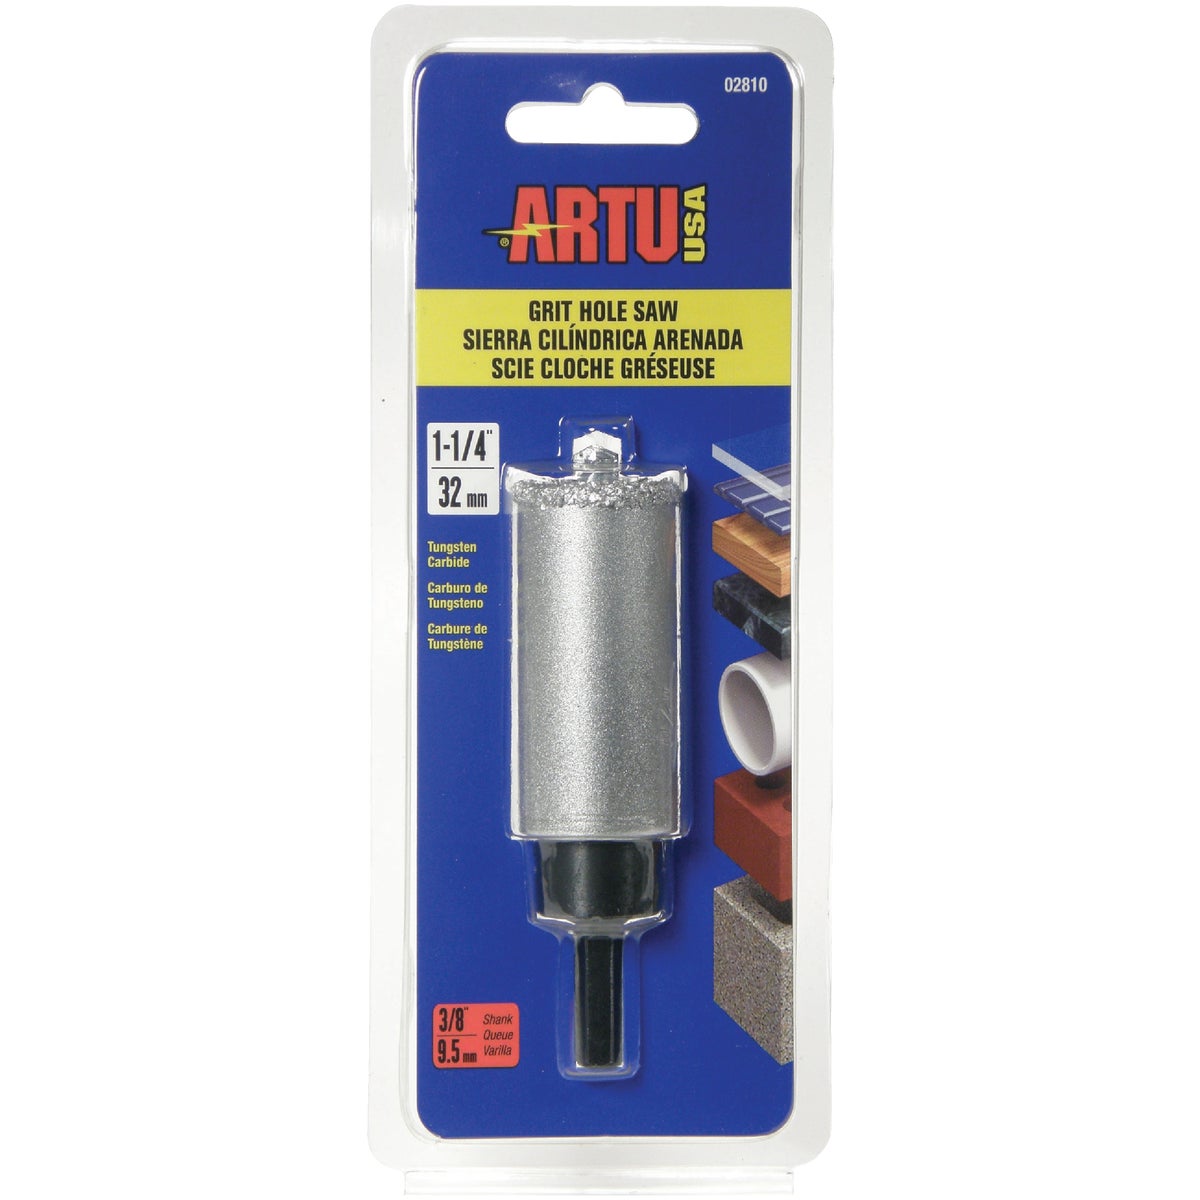 ARTU 1-1/4 In. Tungsten Carbide Grit Hole Saw with Arbor and Pilot Bit